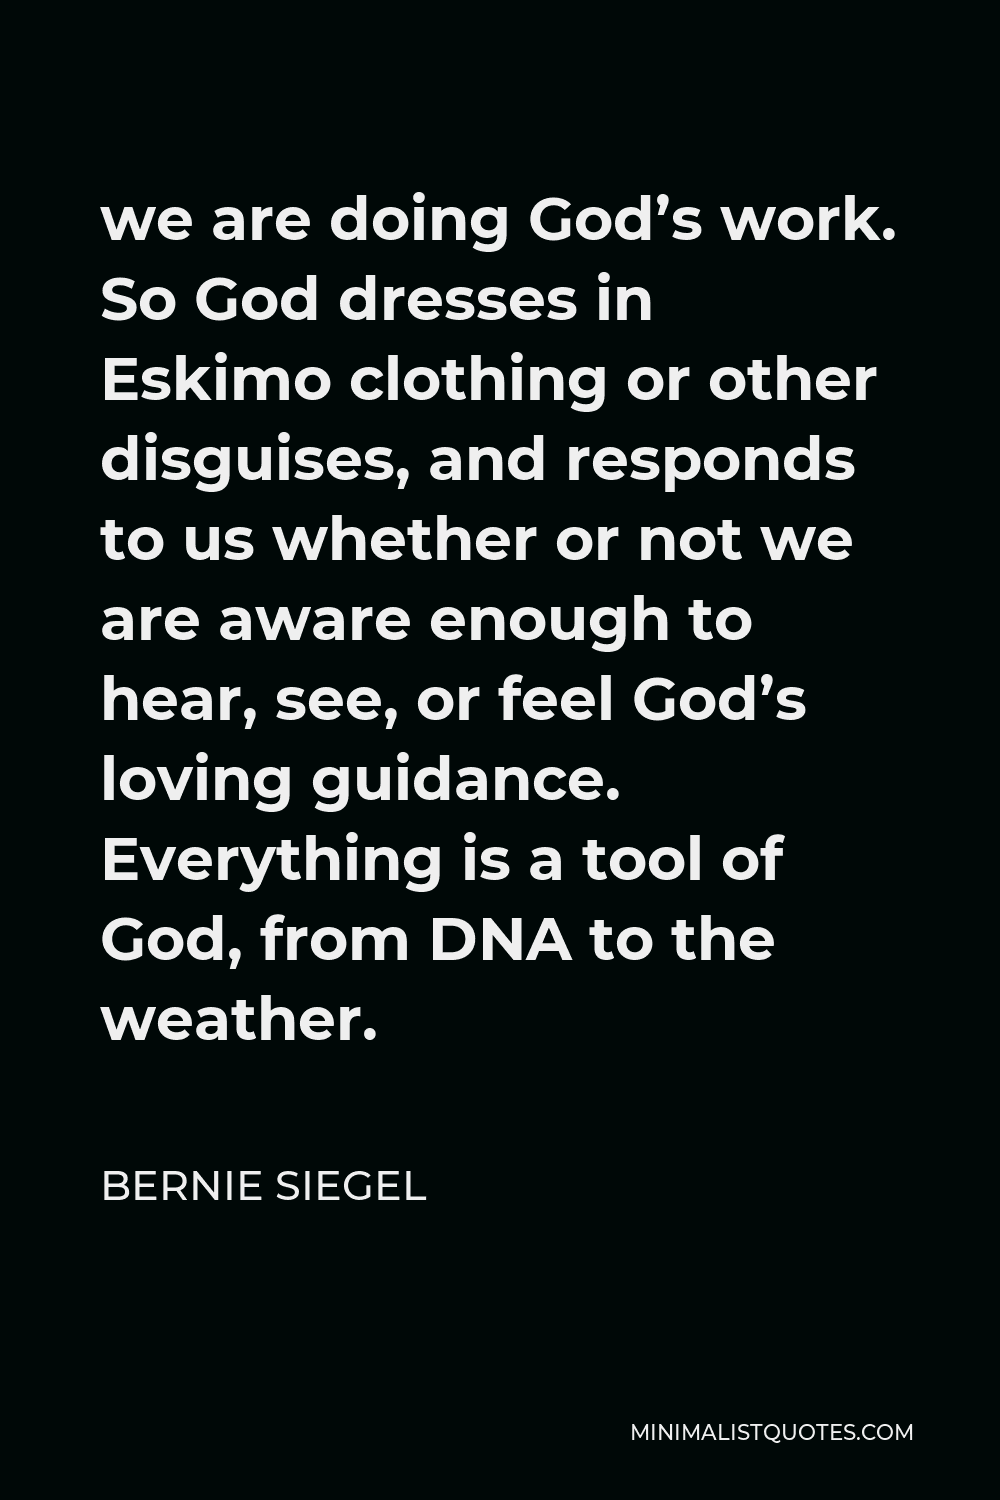 Bernie Siegel Quote - we are doing God’s work. So God dresses in Eskimo clothing or other disguises, and responds to us whether or not we are aware enough to hear, see, or feel God’s loving guidance. Everything is a tool of God, from DNA to the weather.